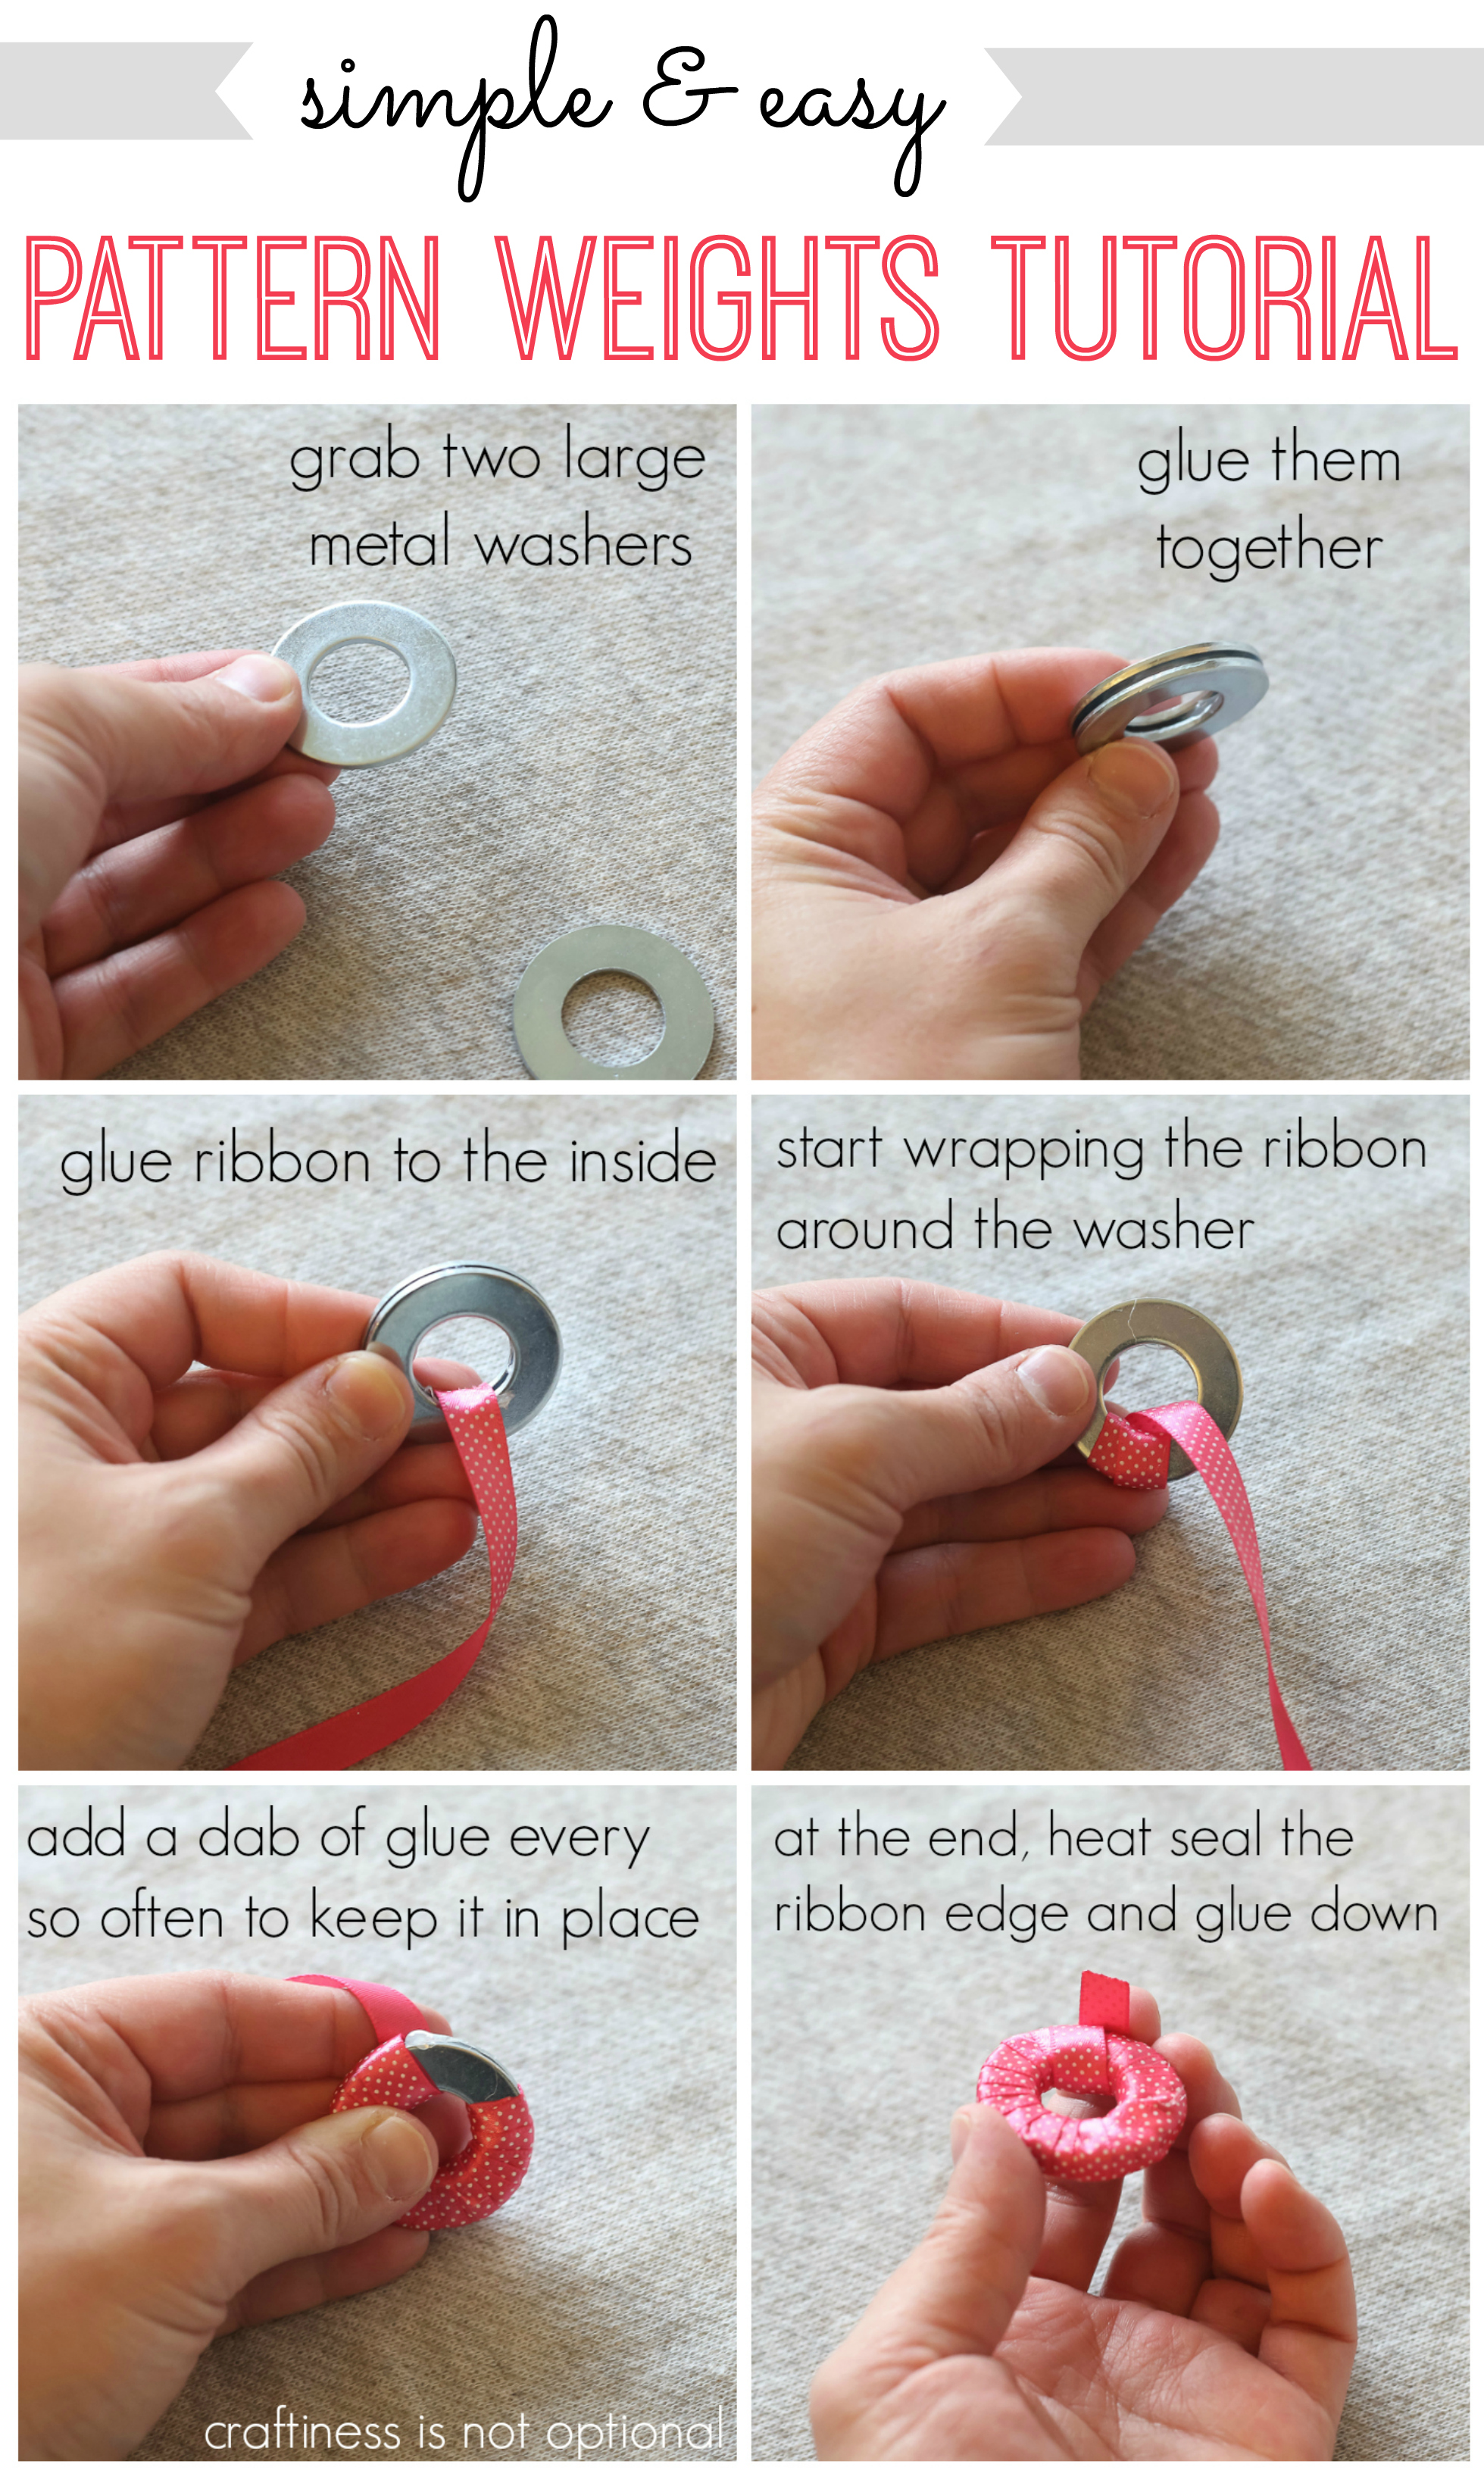 How to Use Pattern Weights - Plus a Tutorial for Sewing Your Own with Scraps